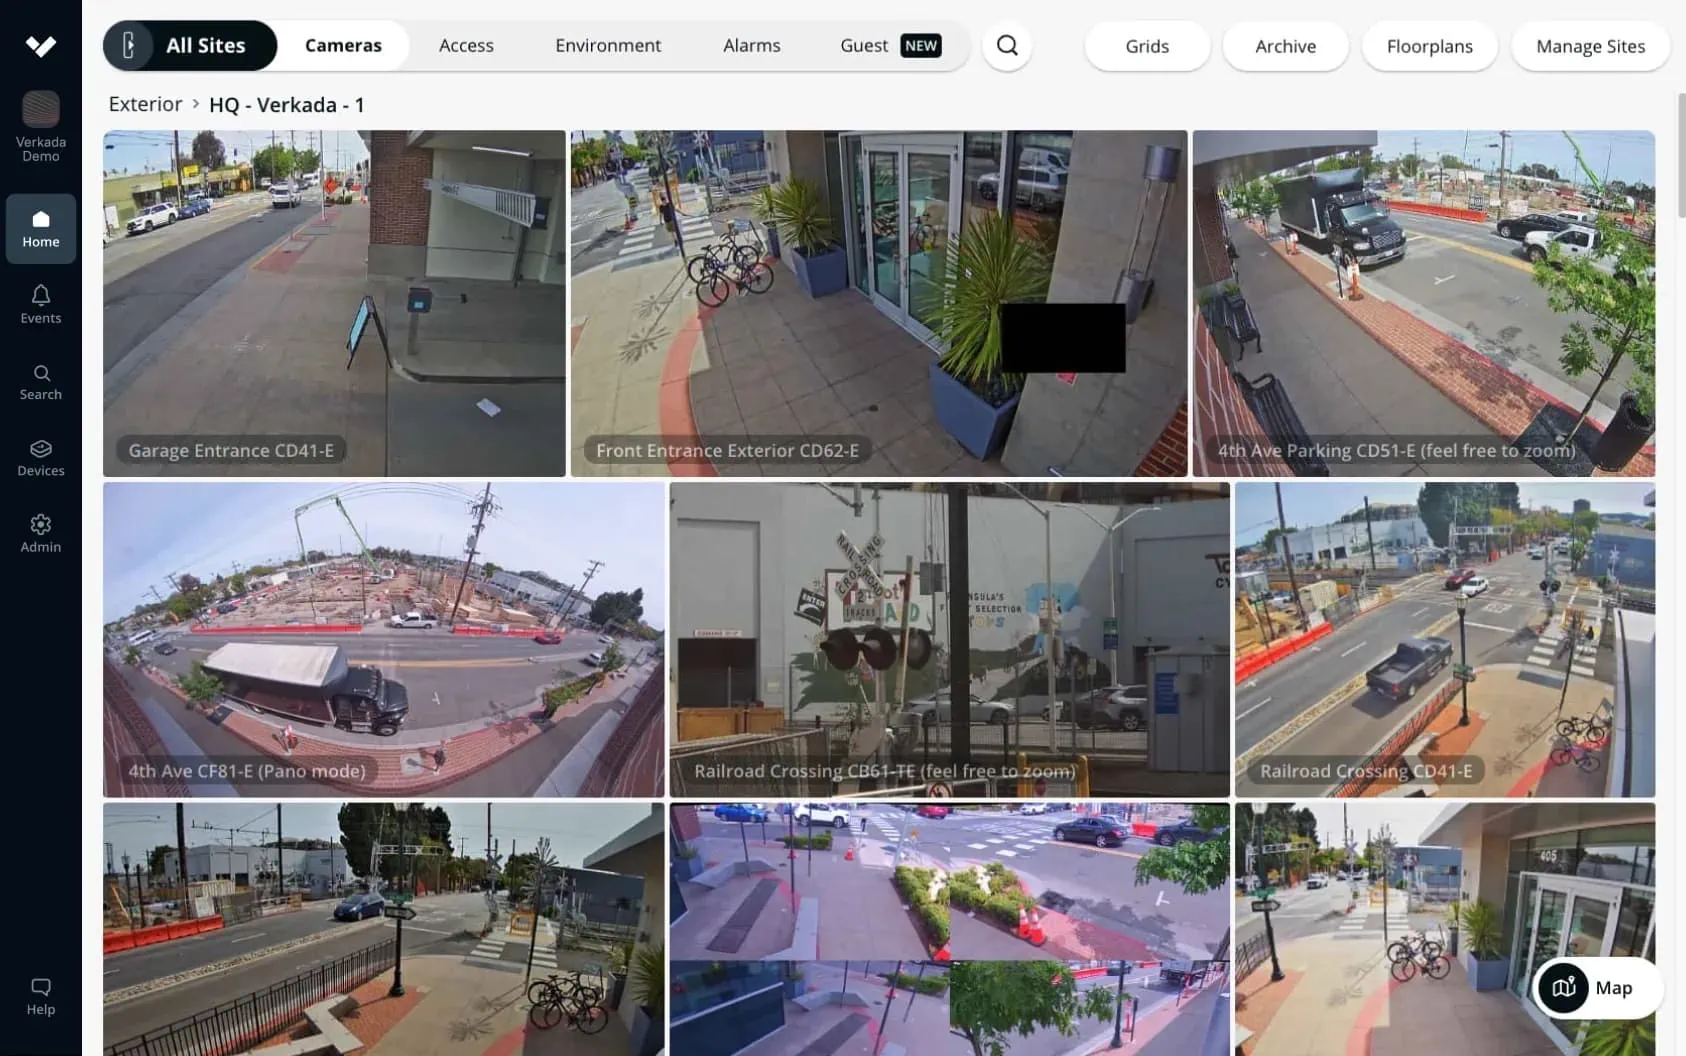 Command interface displaying footage captured by building security cameras 